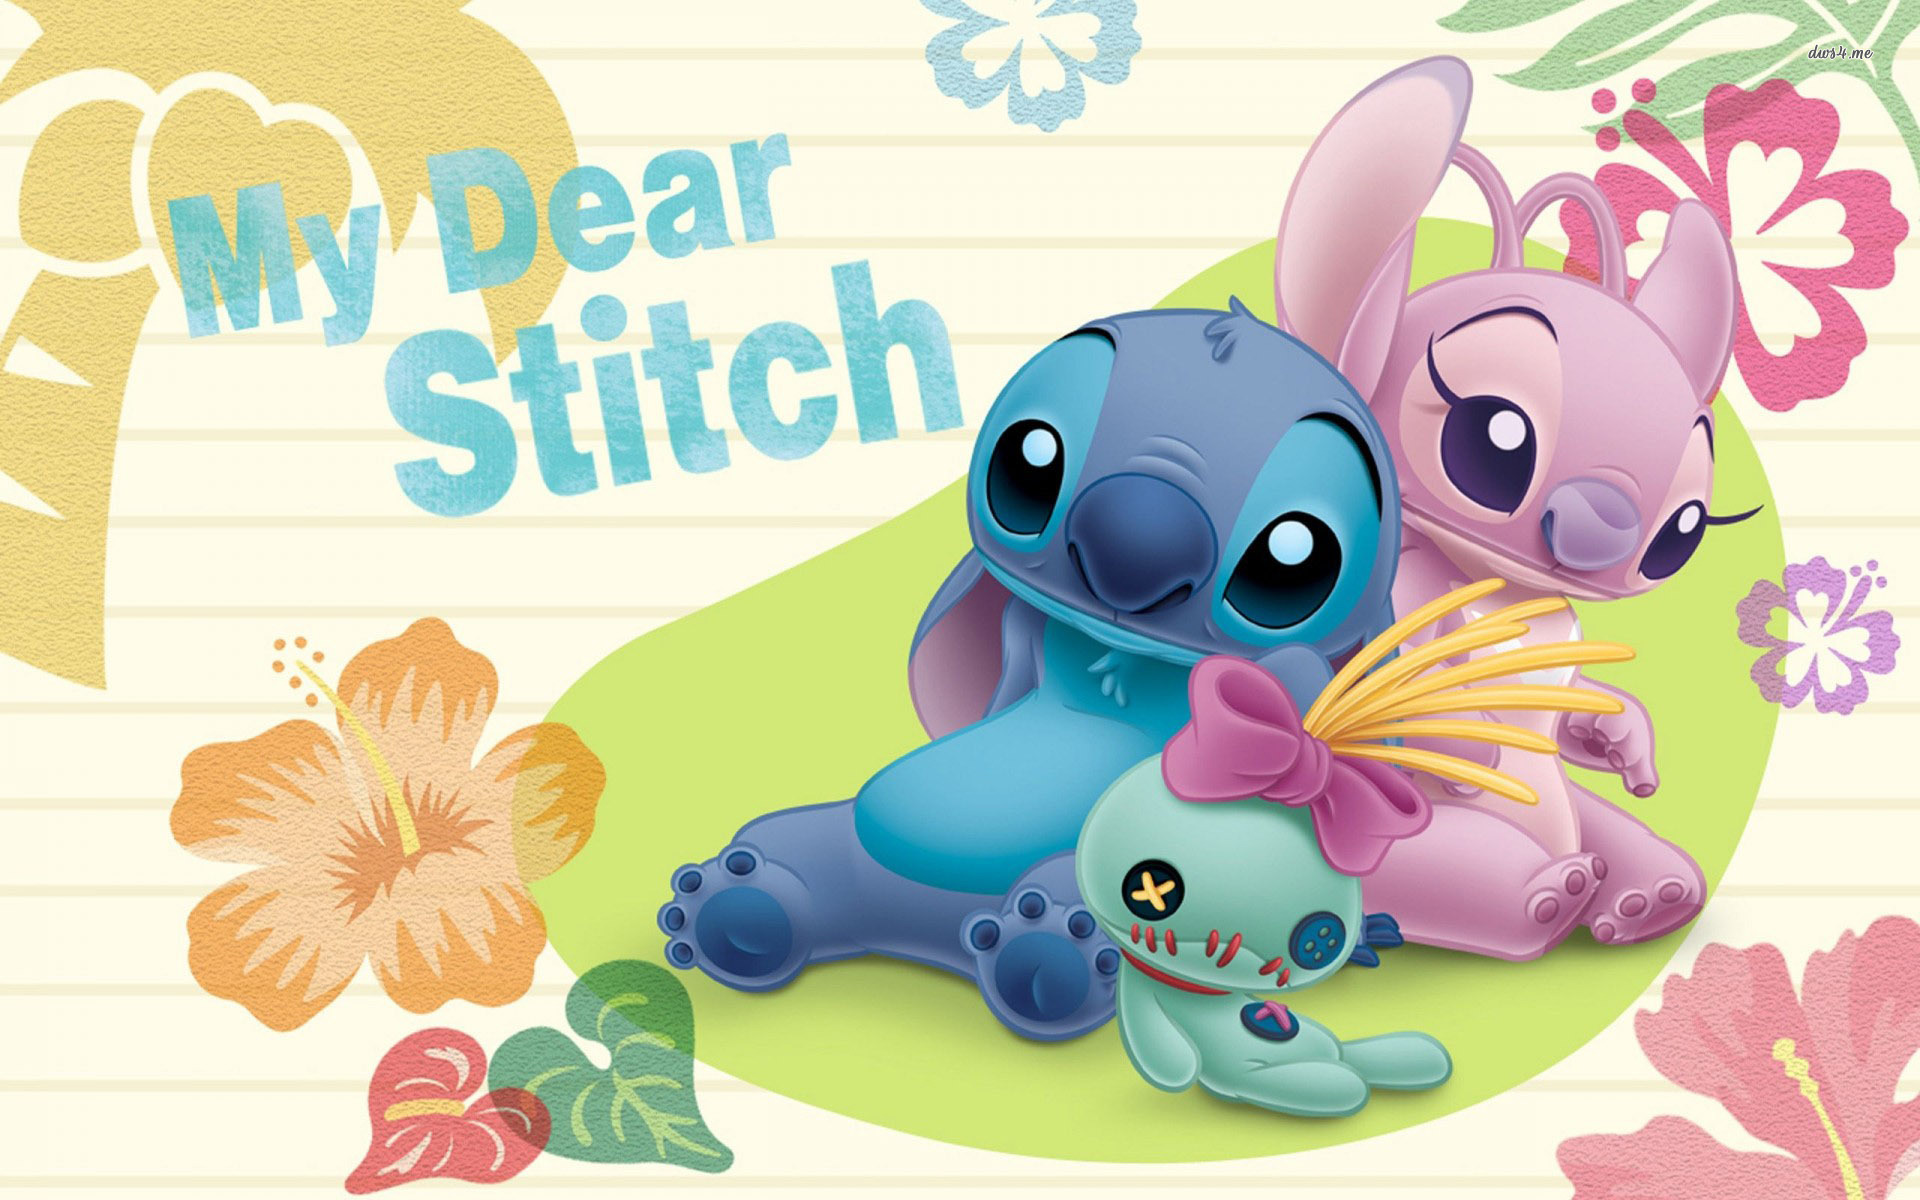 3 Lilo & Stitch HD Wallpapers | Backgrounds - Wallpaper Abyss